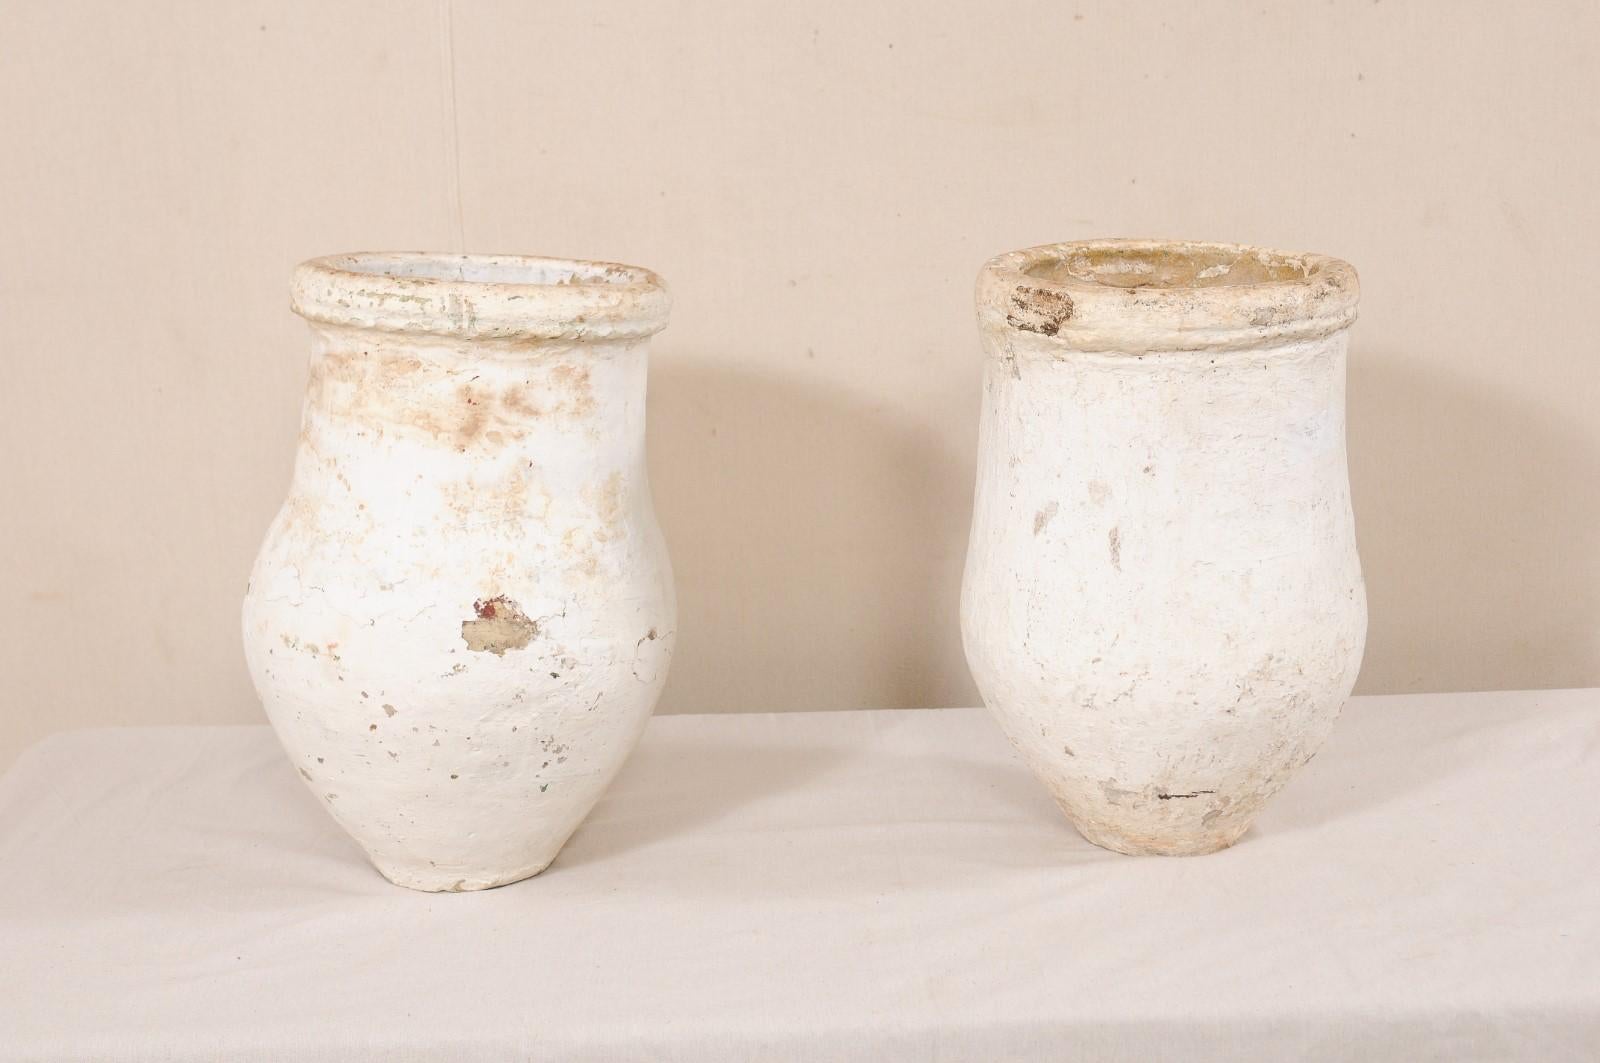 A Spanish pair of clay jars from the 19th century. This pair of antique jars from Spain have gracefully handmade bulbous bodies, with rounded lips, and rest upon flat, rounded bases. They are primarily white and cream, with some chipping and a